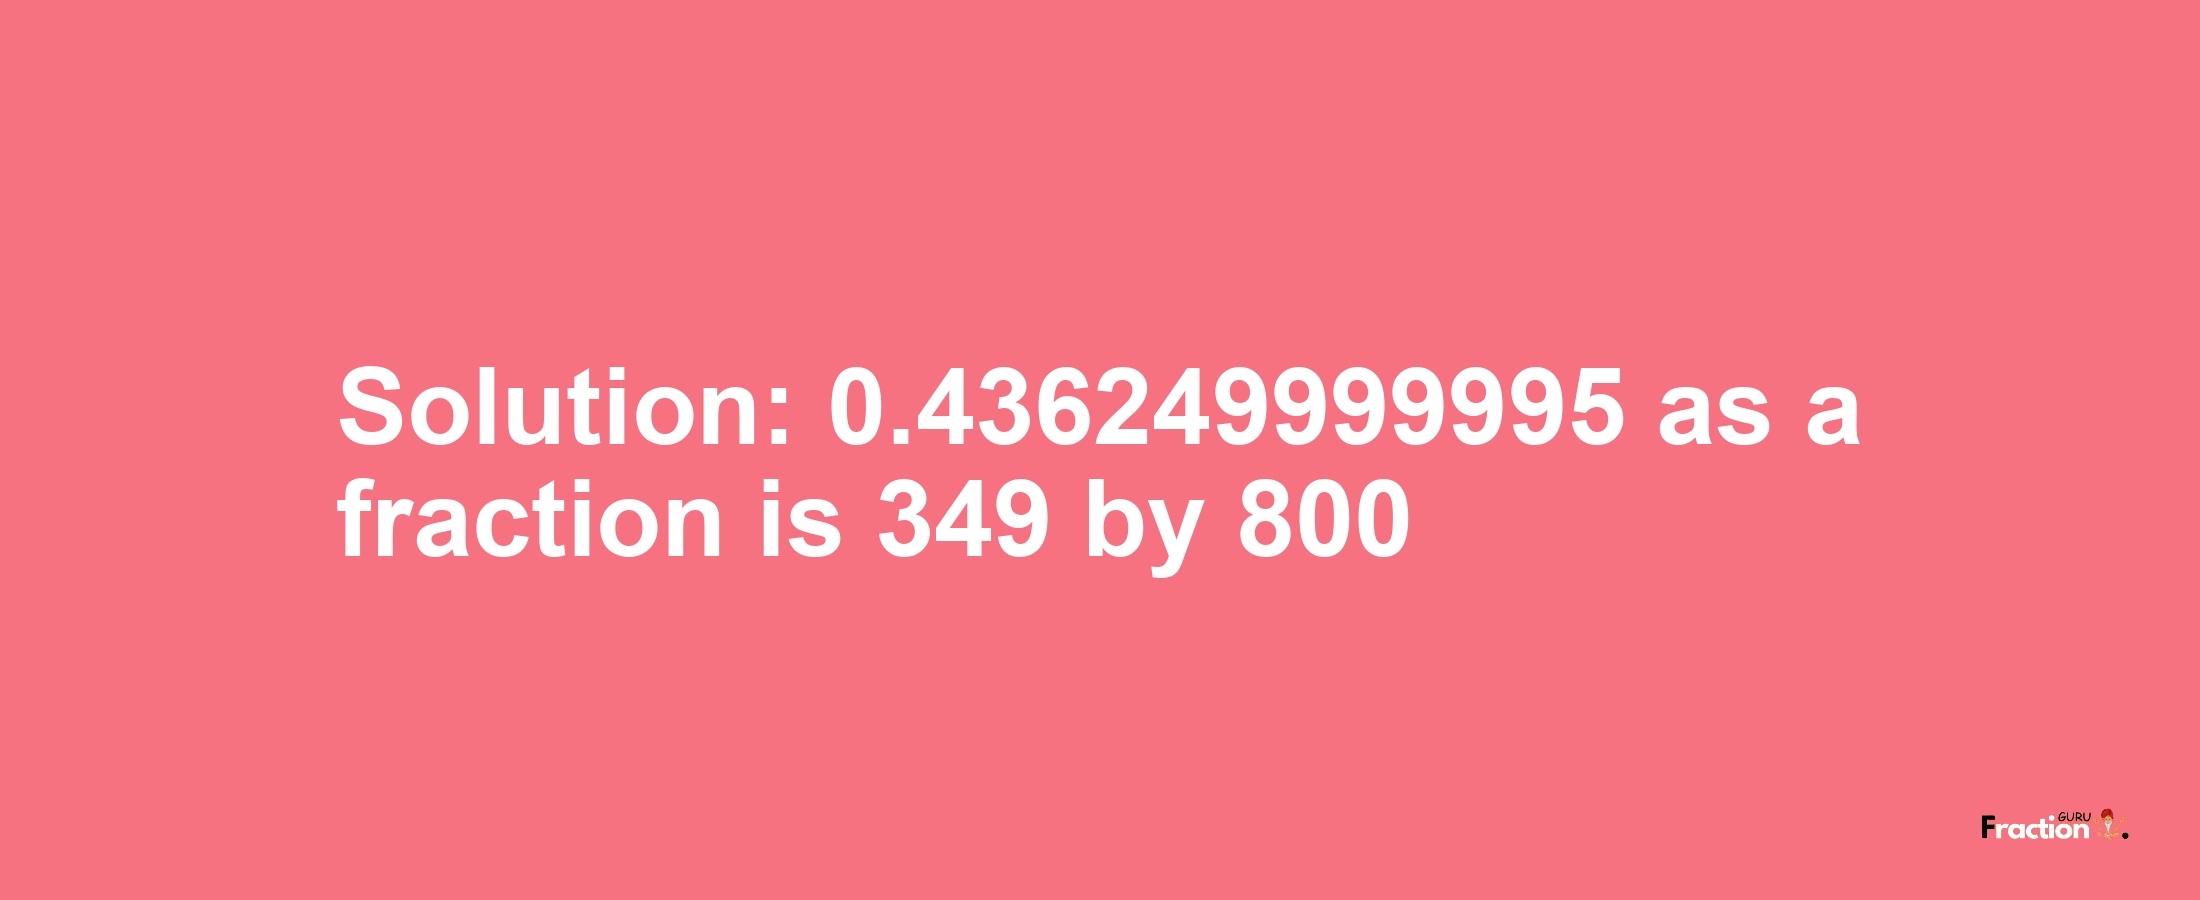 Solution:0.436249999995 as a fraction is 349/800